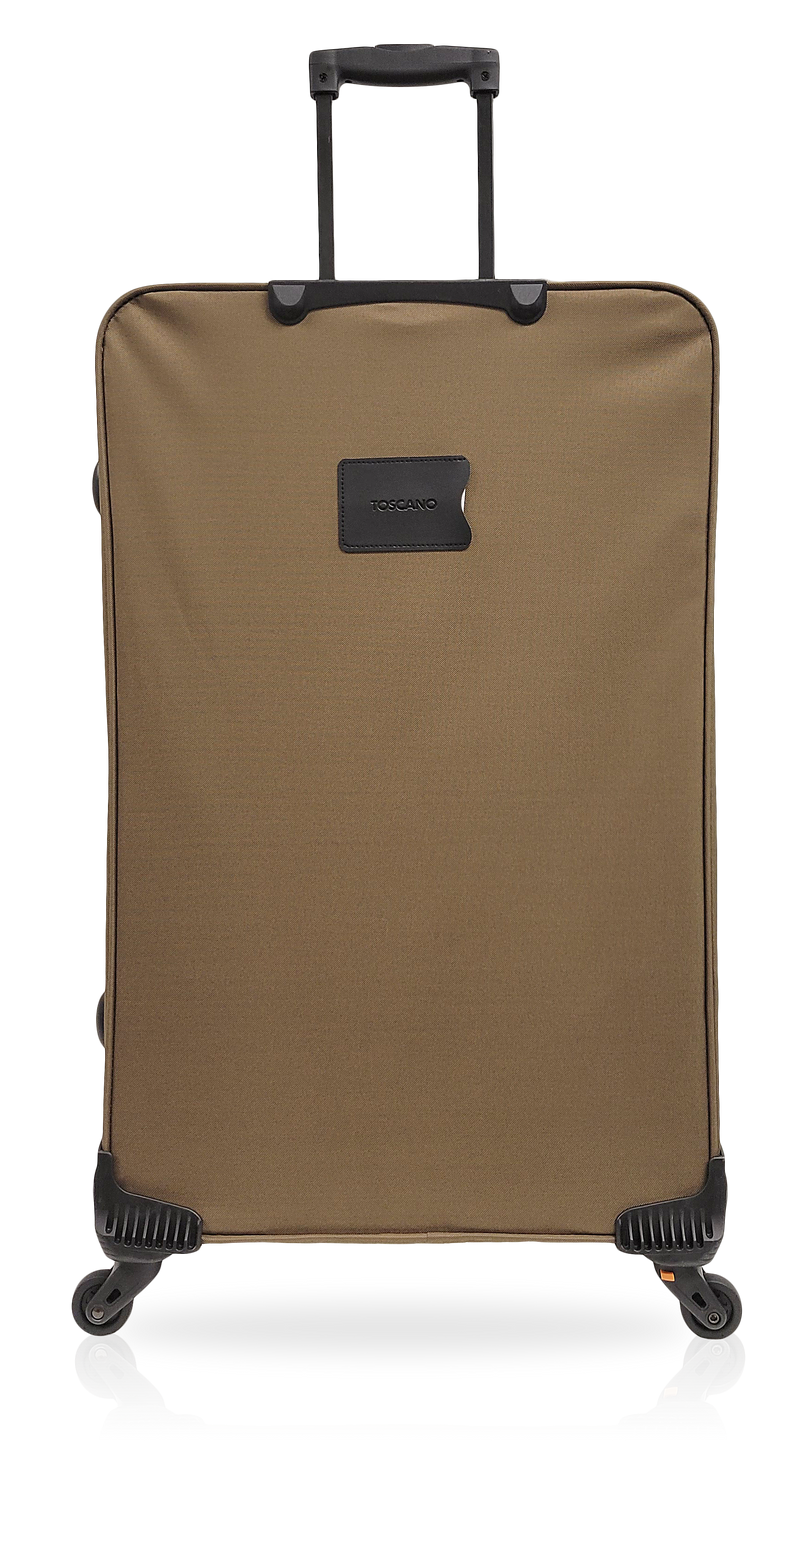 TOSCANO by Tucci NOTEVOLE 29" Lightweight Travel Suitcase